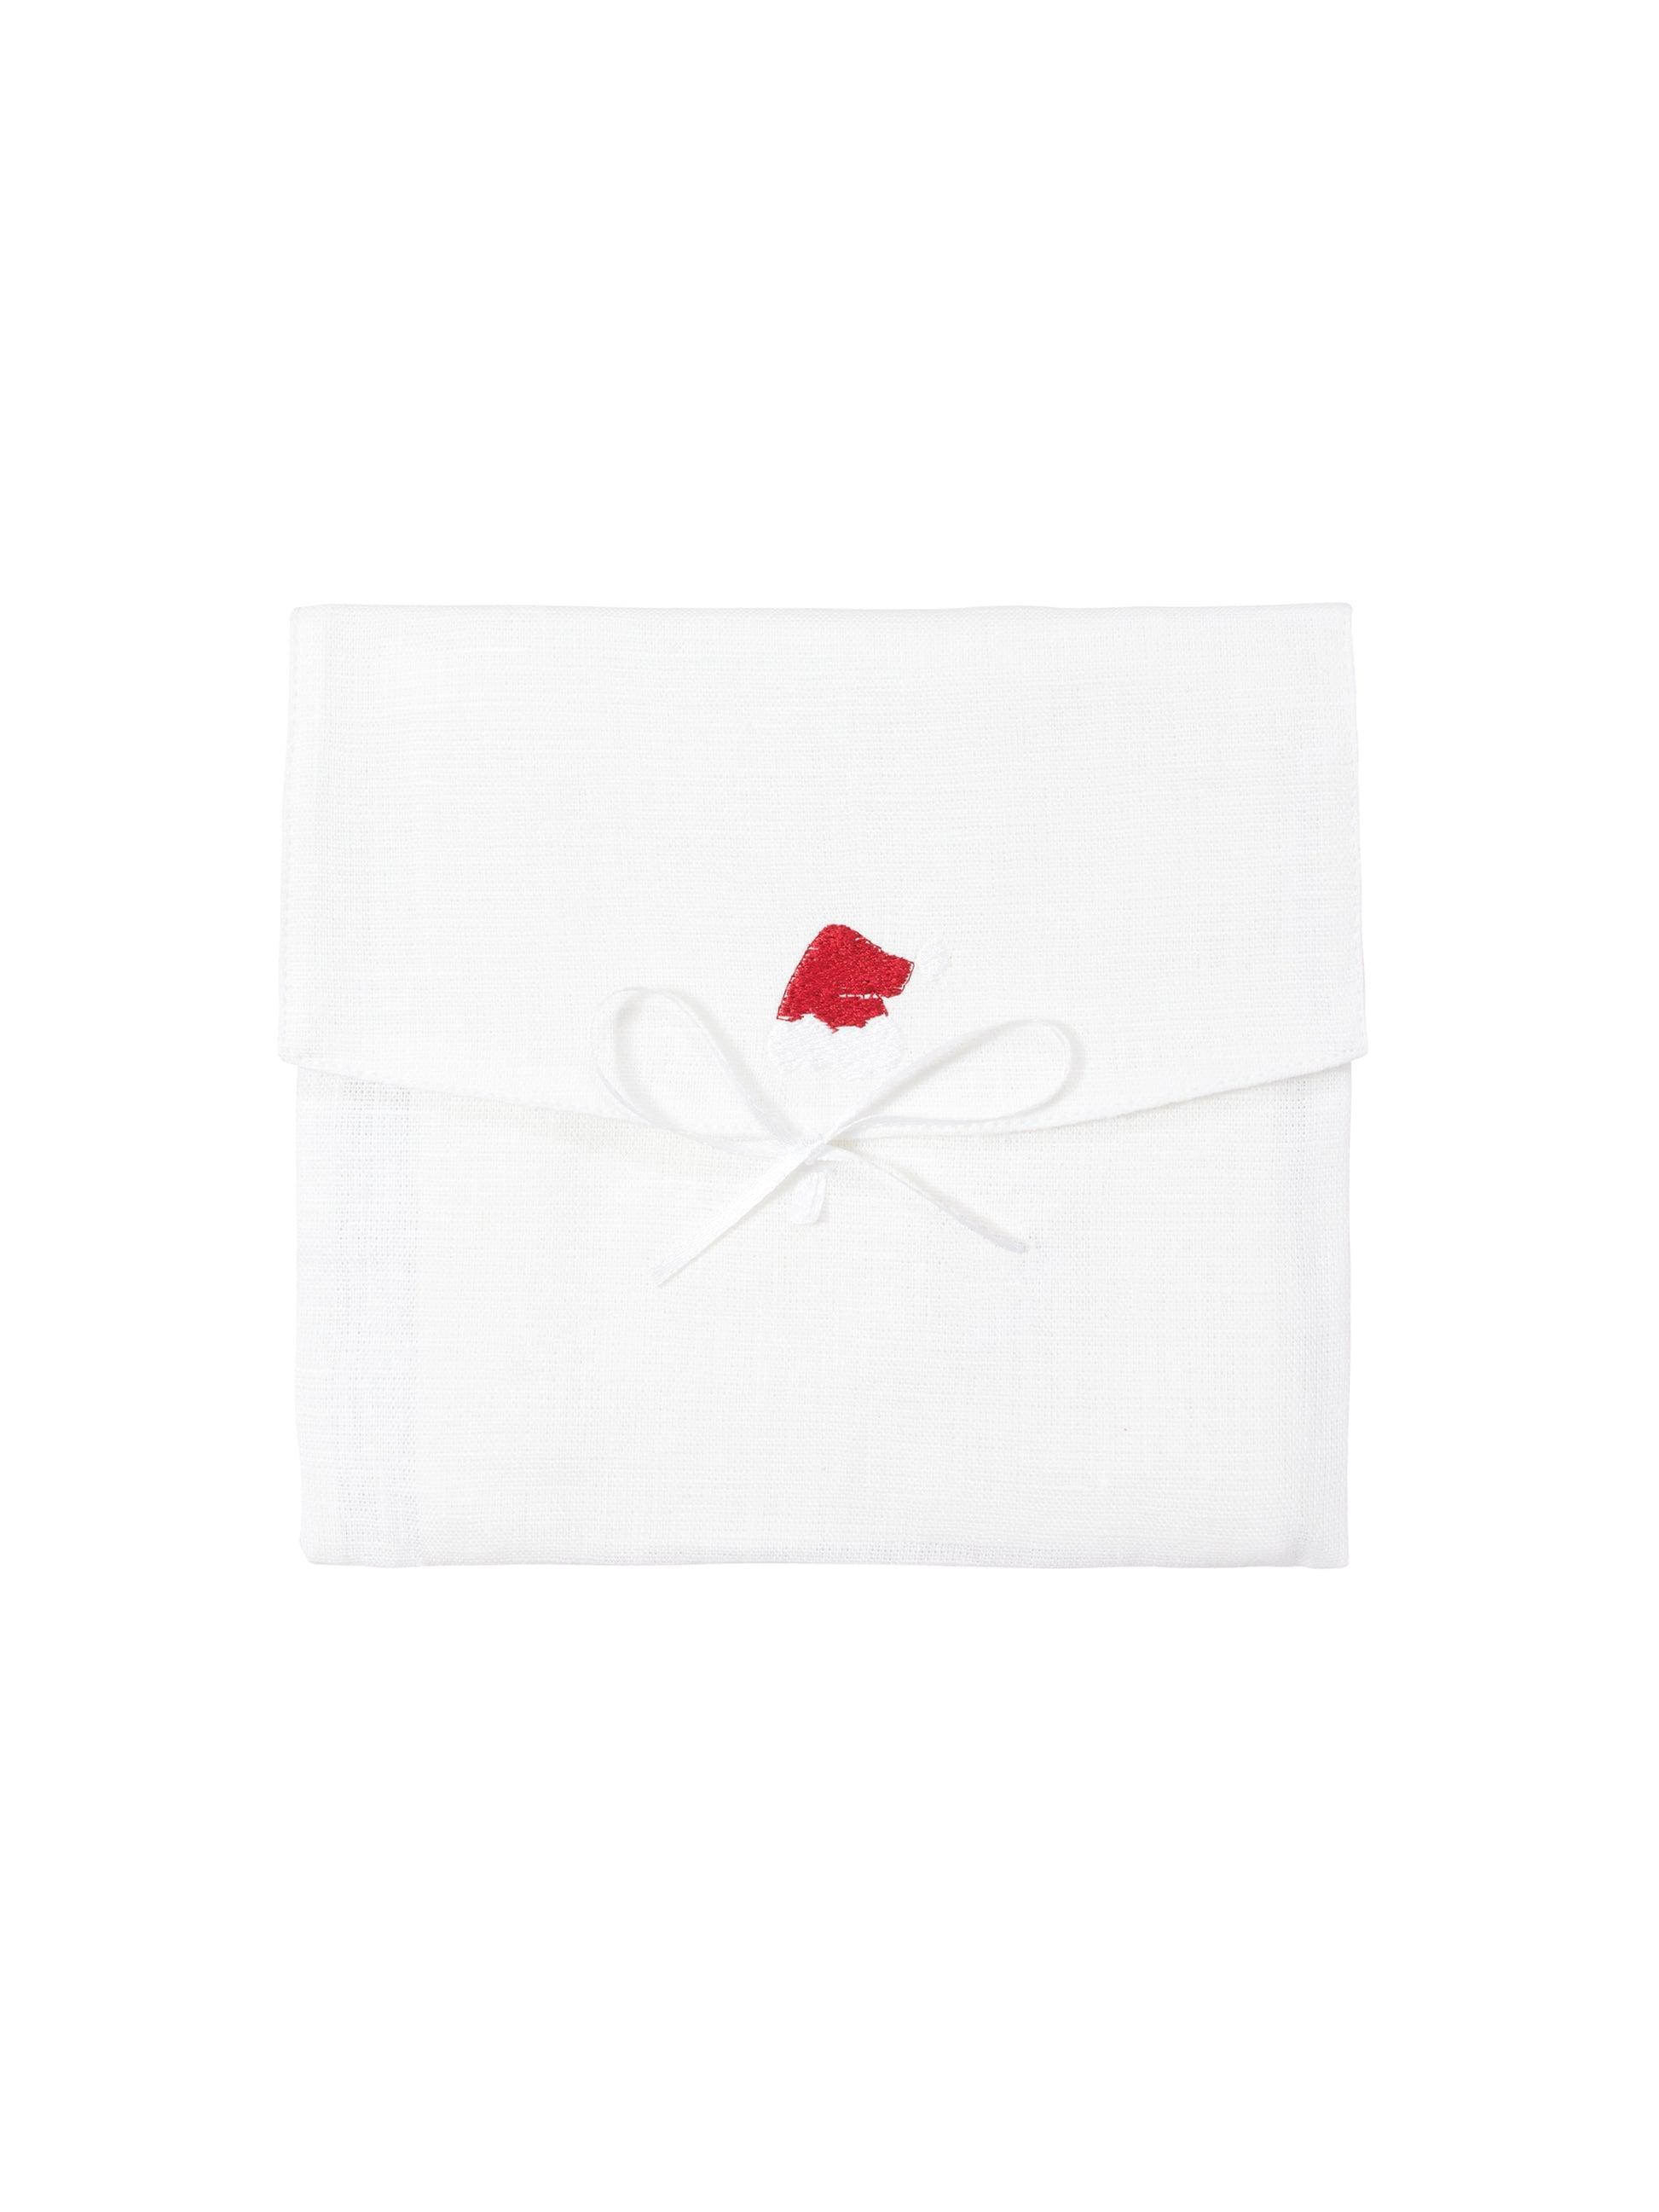 Shop Simple Gifts Napkins at Weston Table